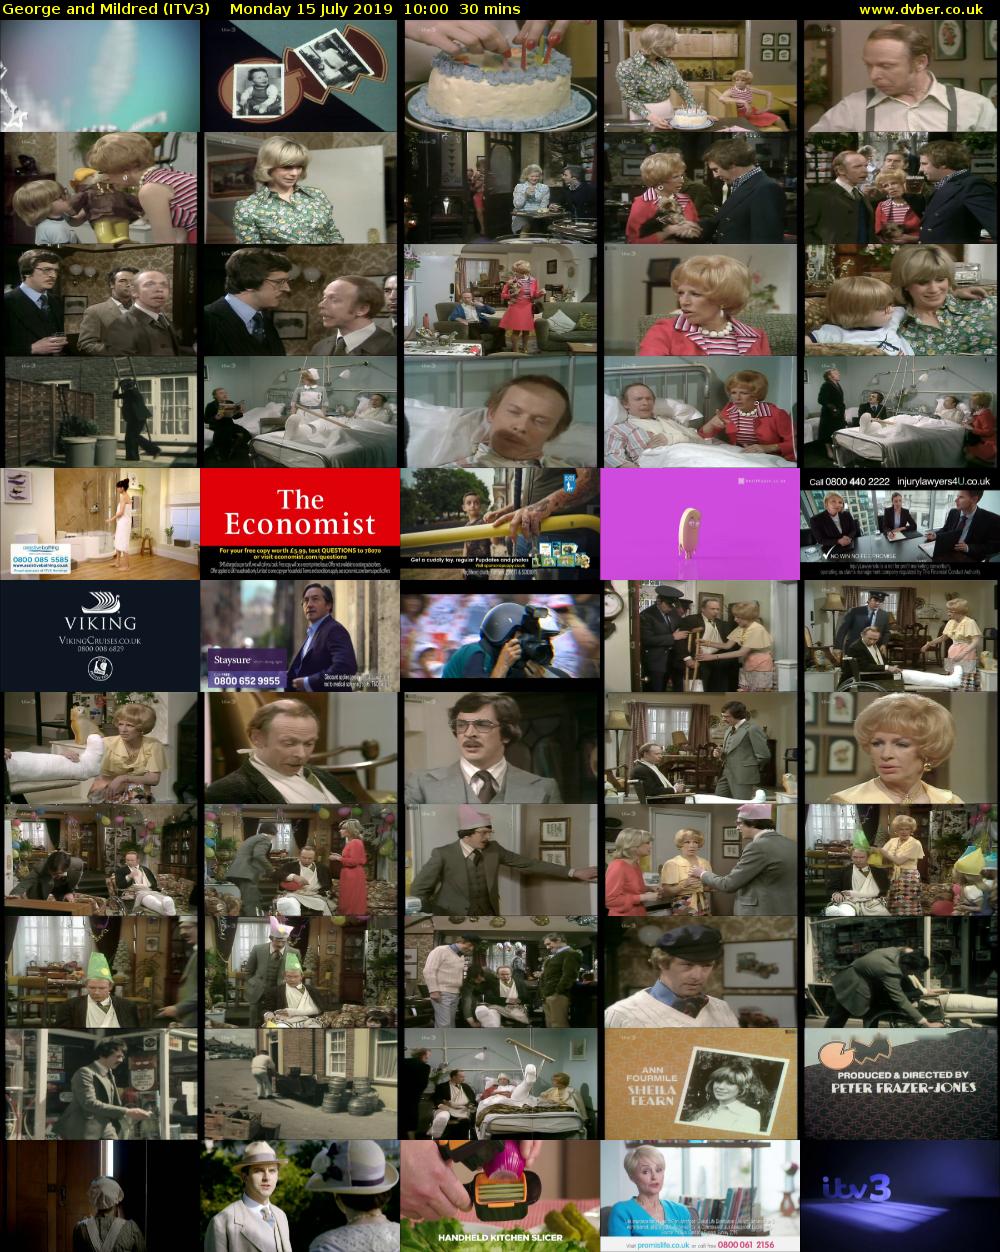 George and Mildred (ITV3) Monday 15 July 2019 10:00 - 10:30